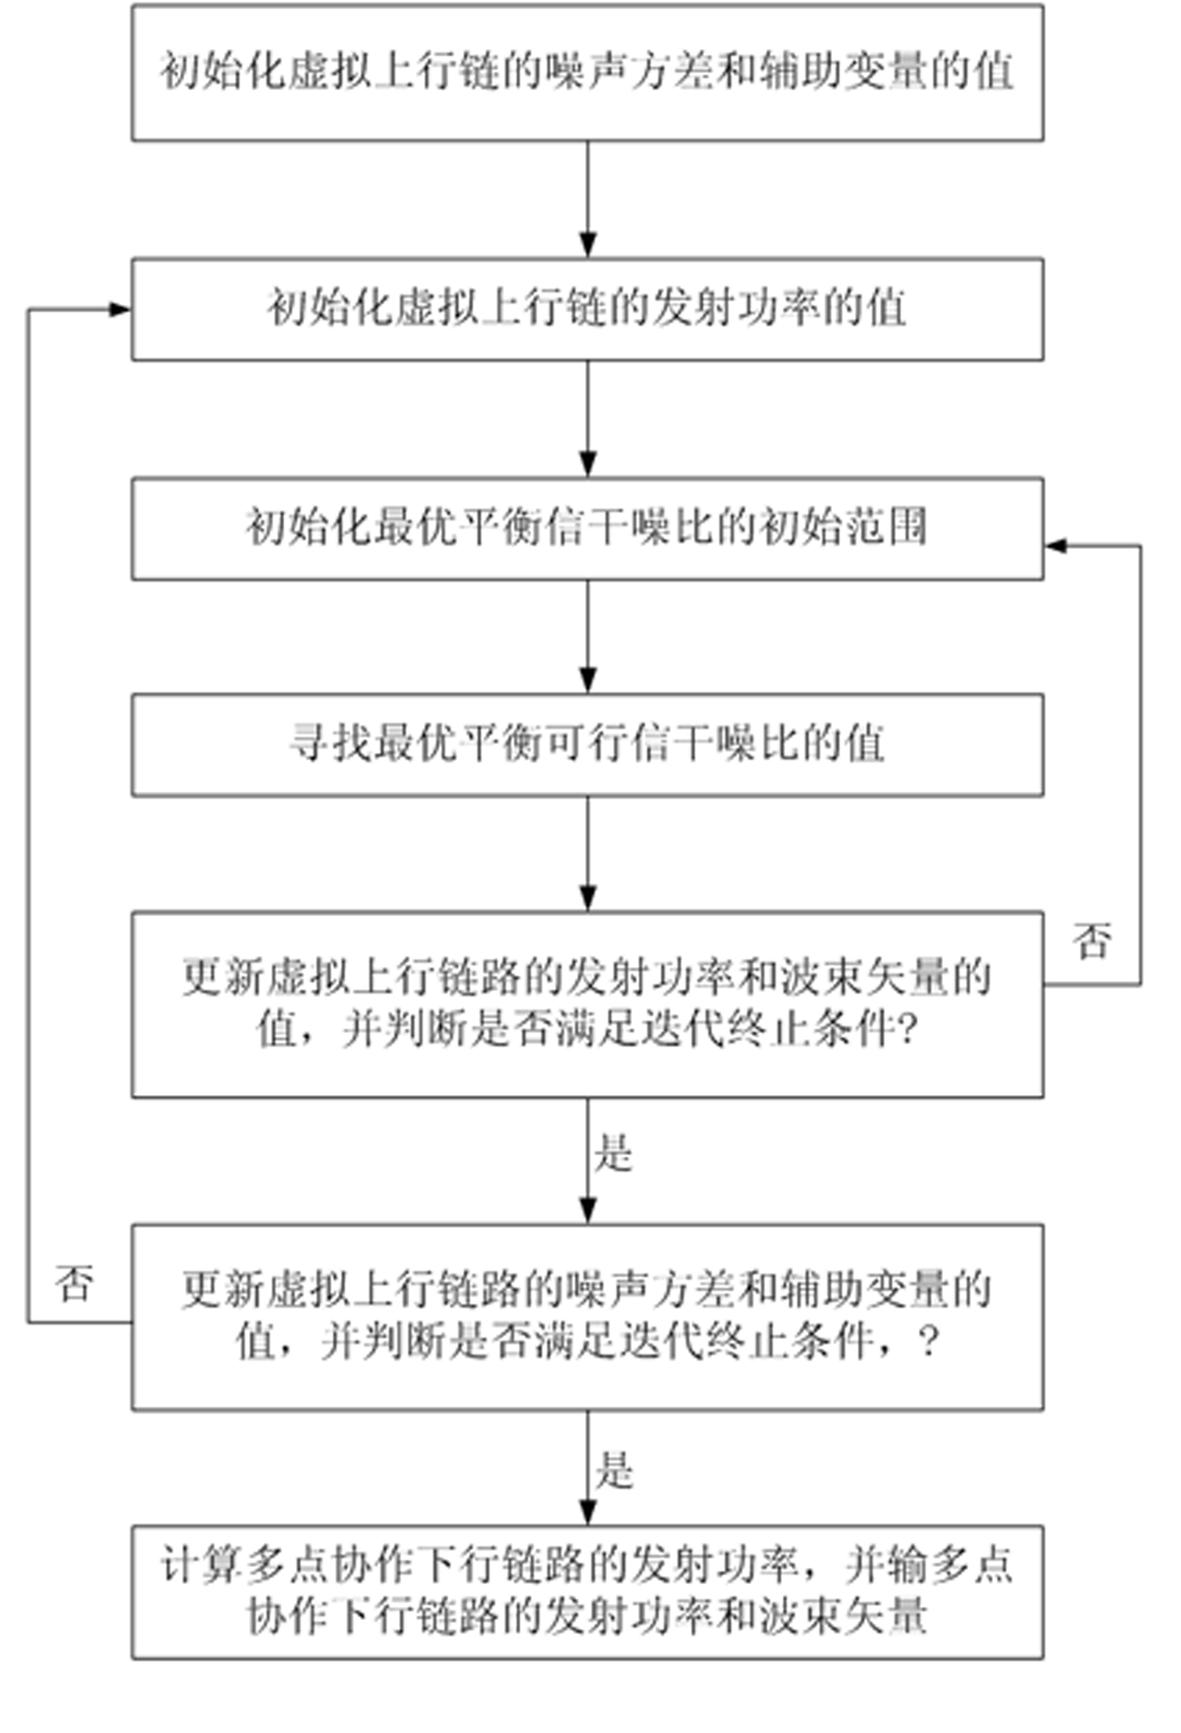 Multipoint coordinated beam forming and power allocation method for single base station power constraint